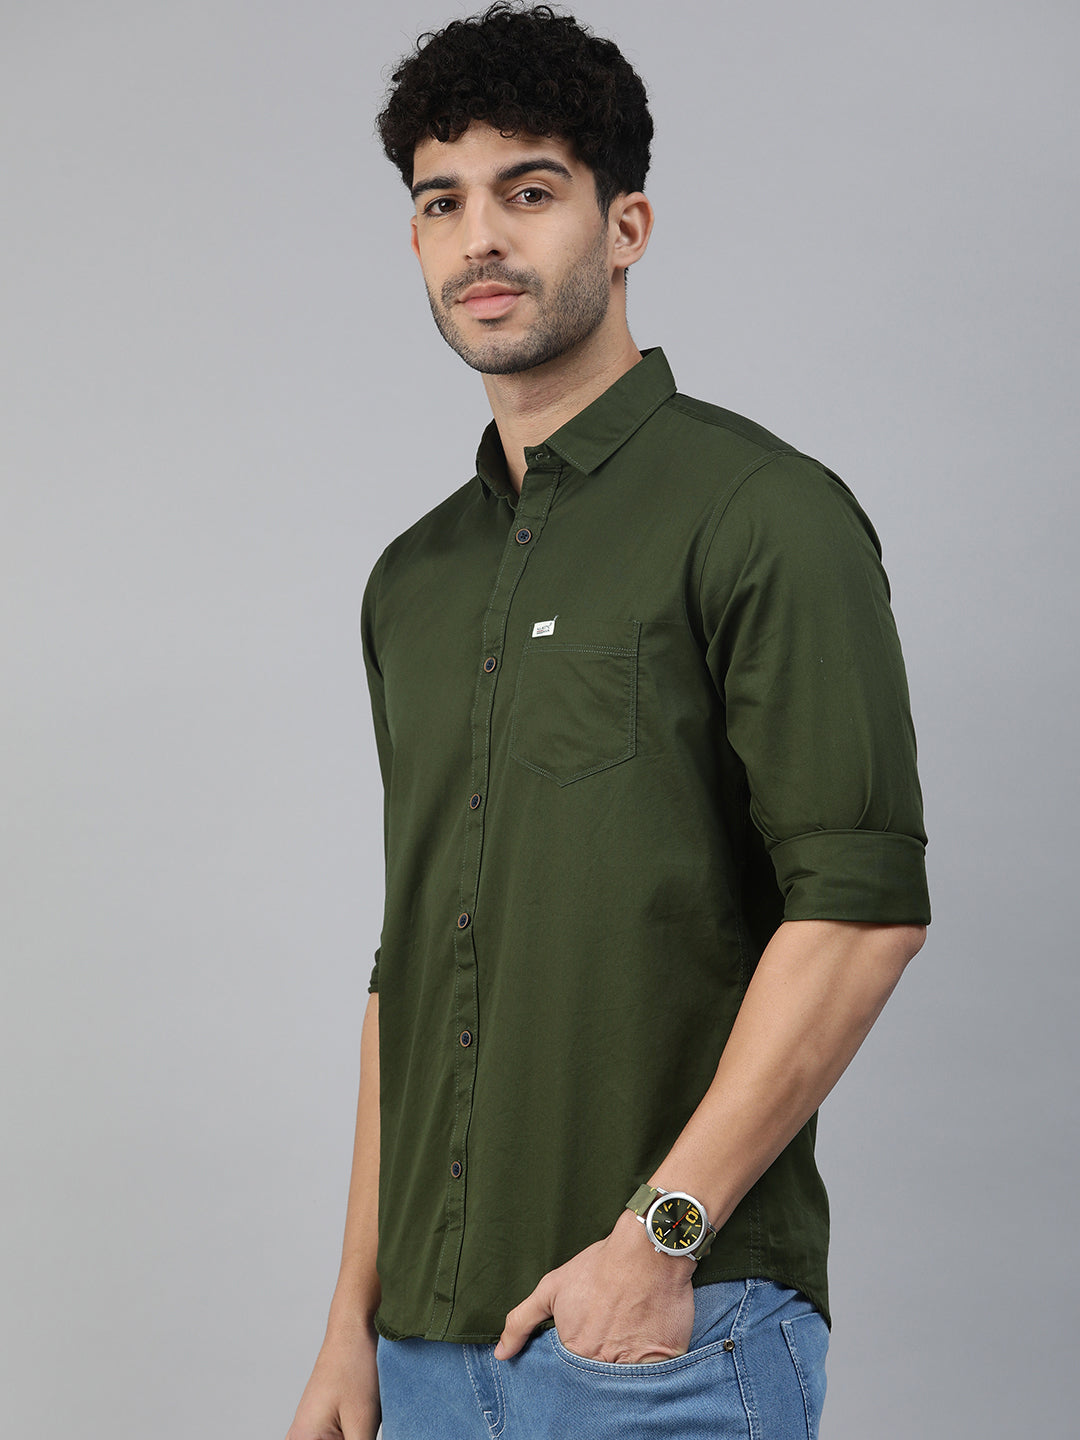 Majestic Man Comfort Slim Fit Solid Cotton Casual Shirt - Olive